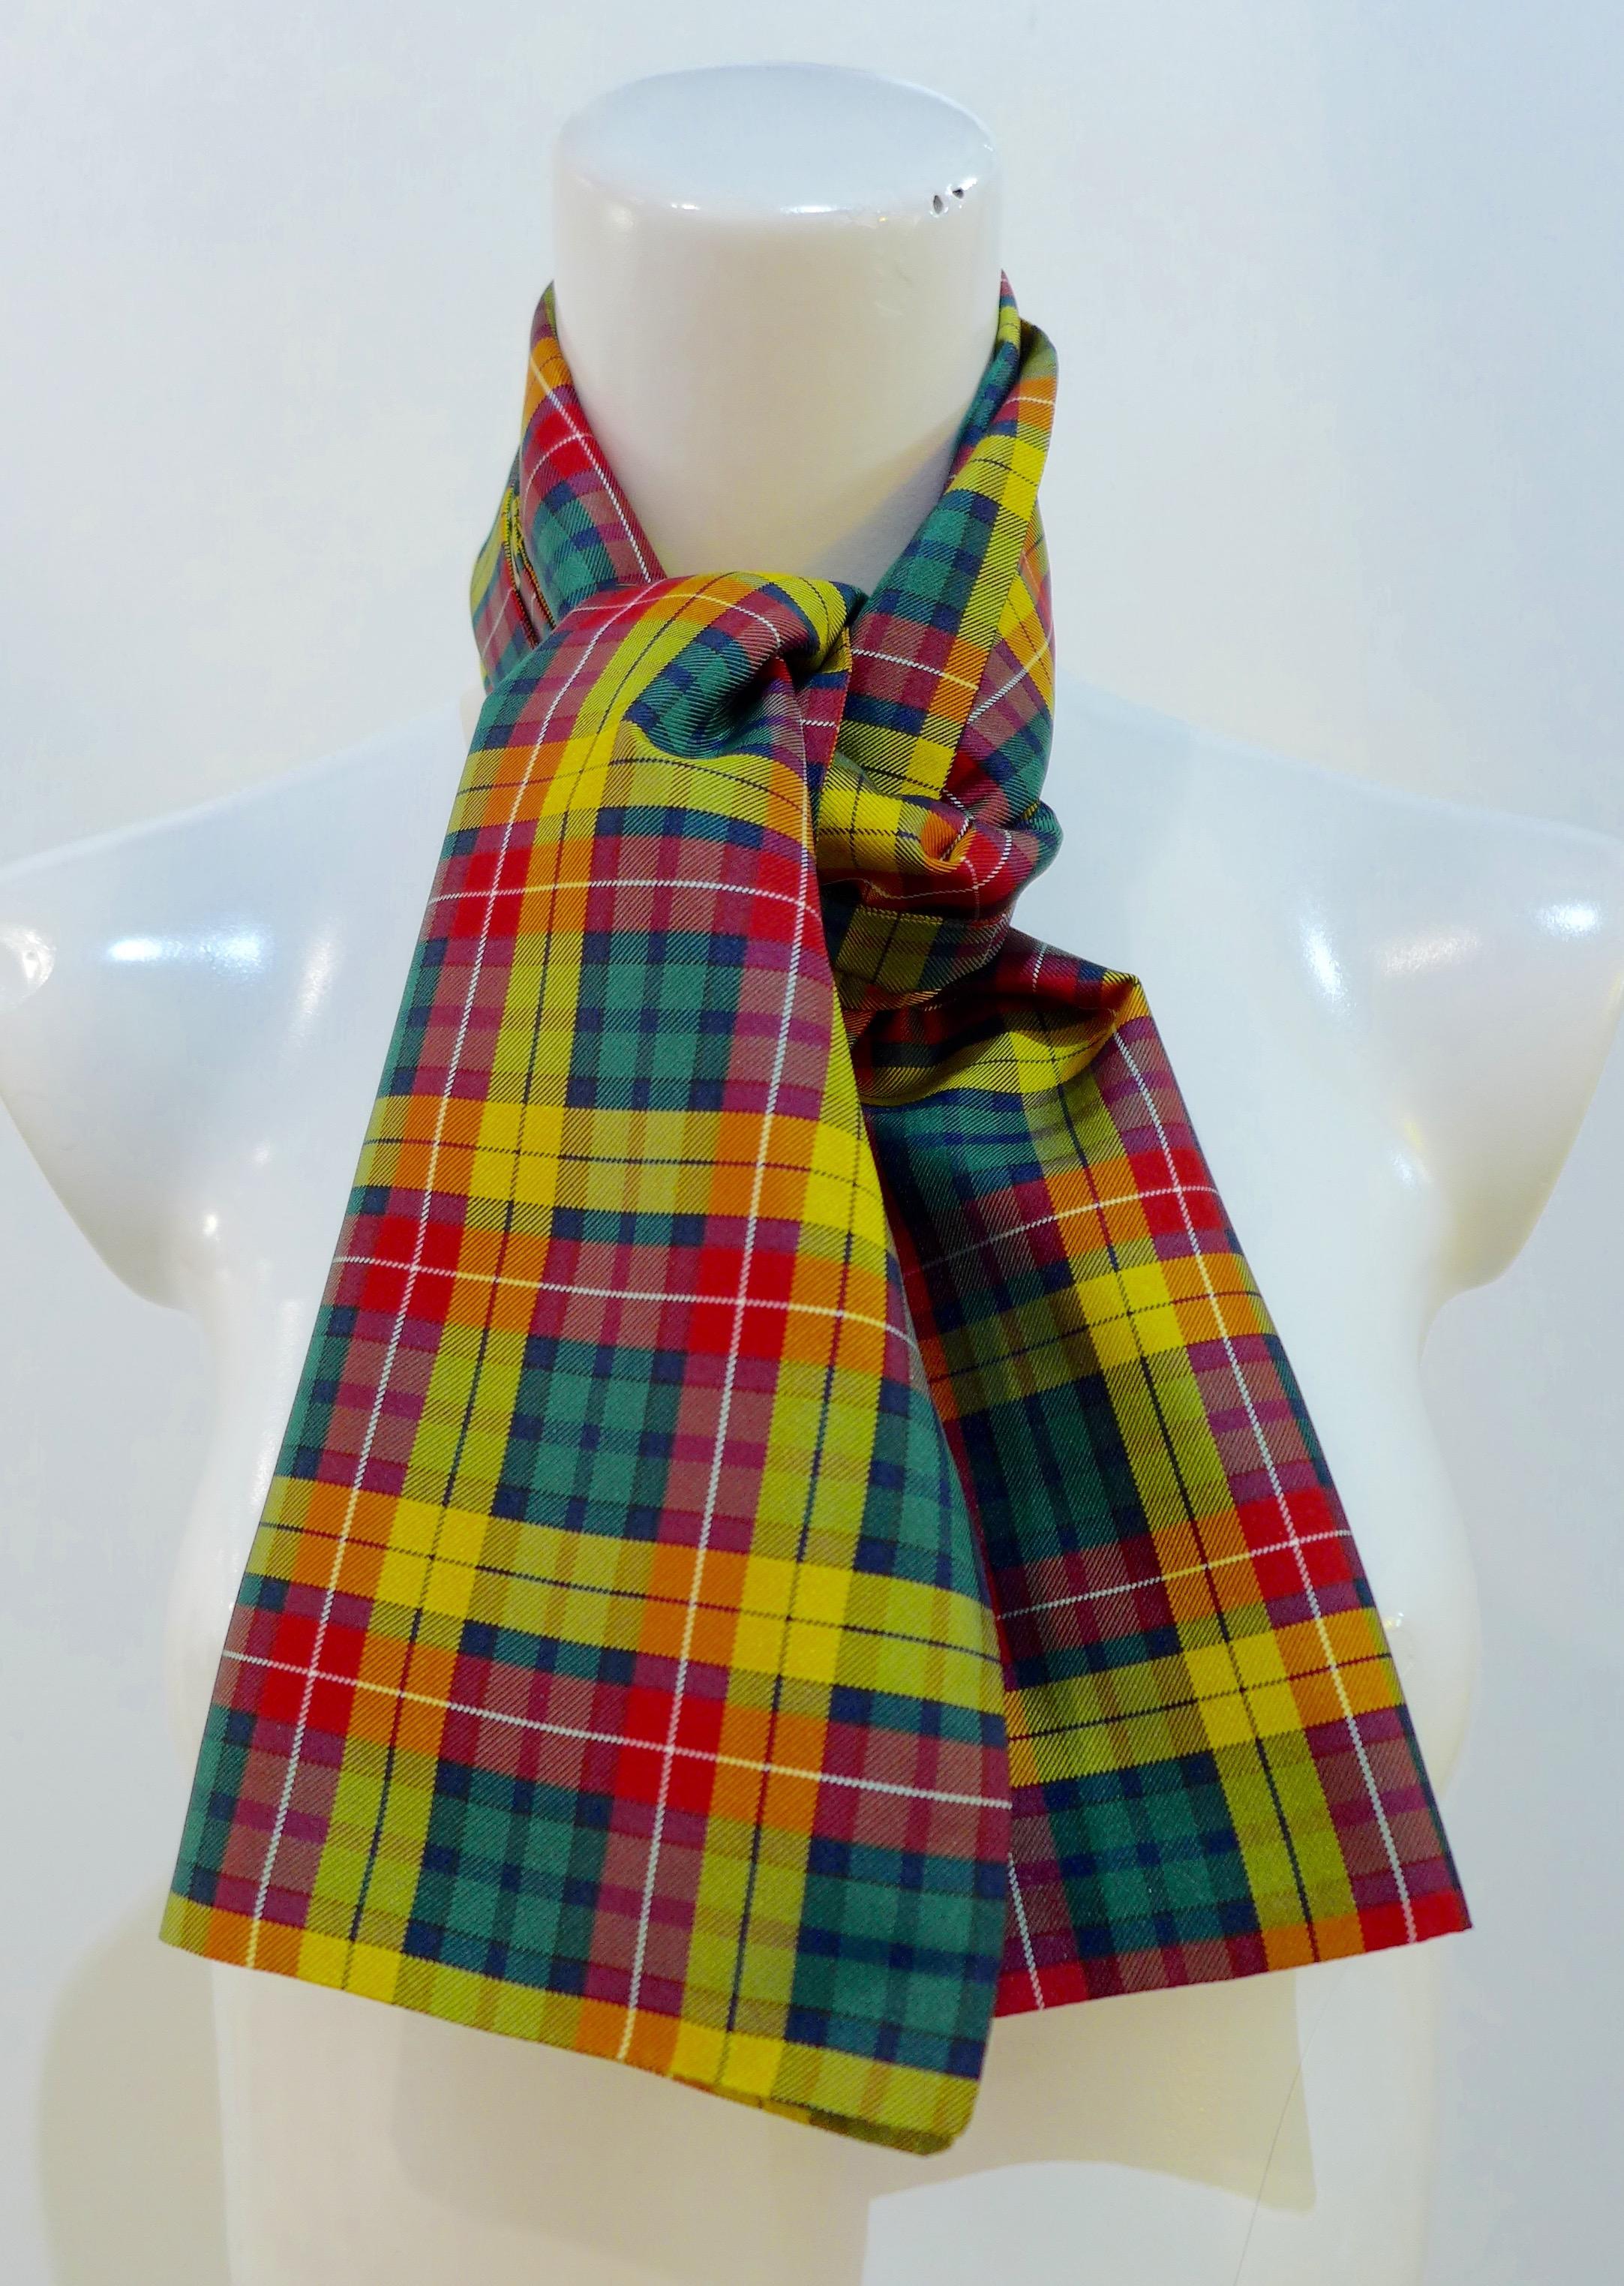 Yves Saint Laurent Rive Gauche Tartan Scarf In Good Condition For Sale In Los Angeles, CA